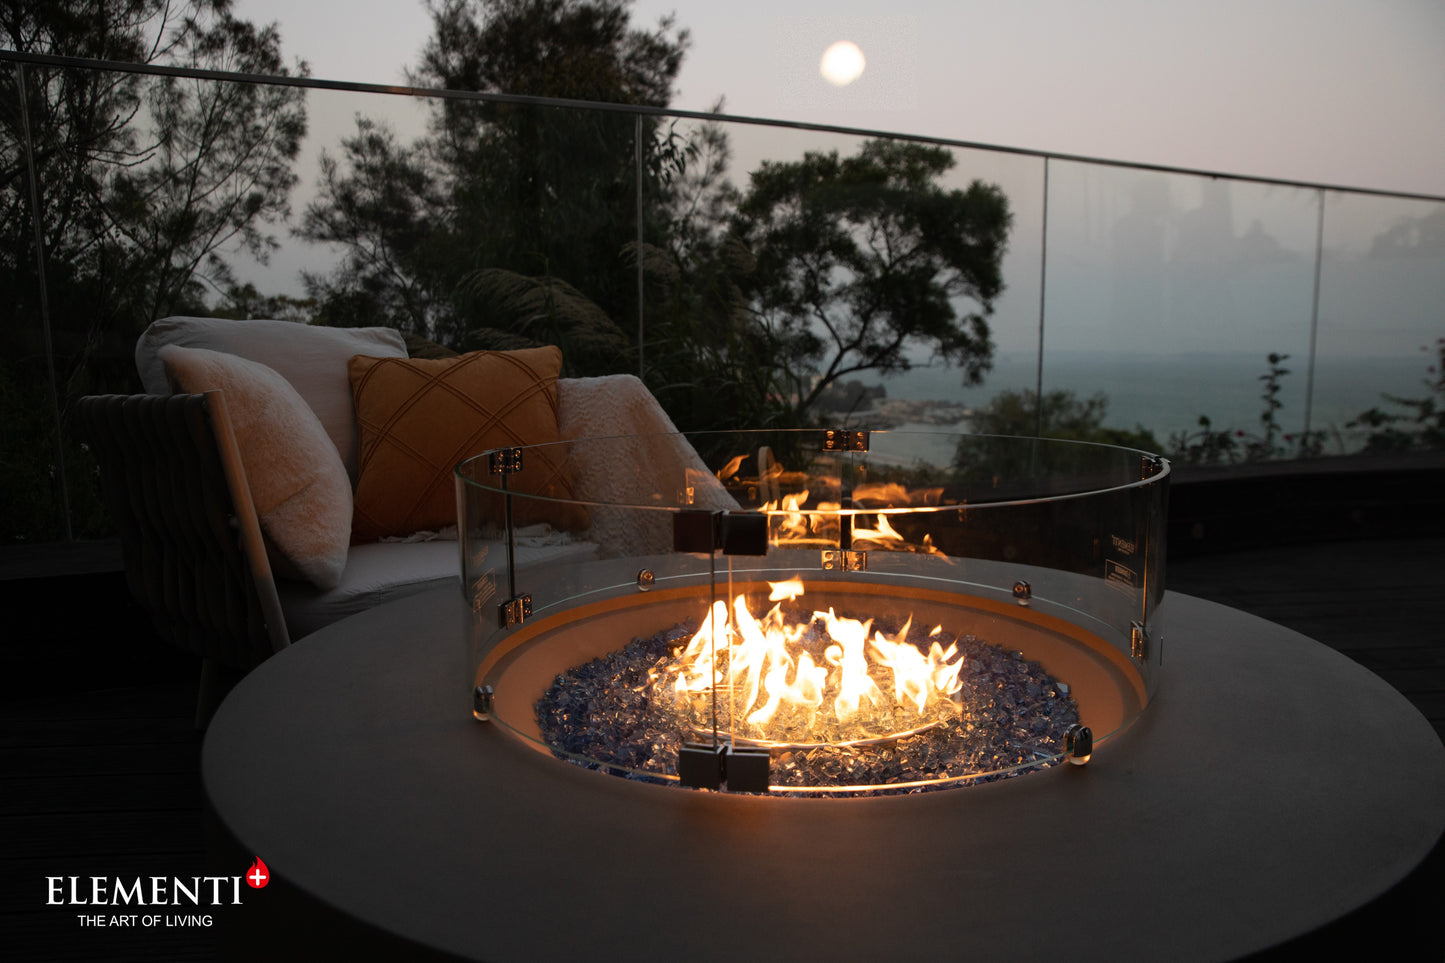 Colosseo Modern Smooth Concrete Round Fire Pit Table